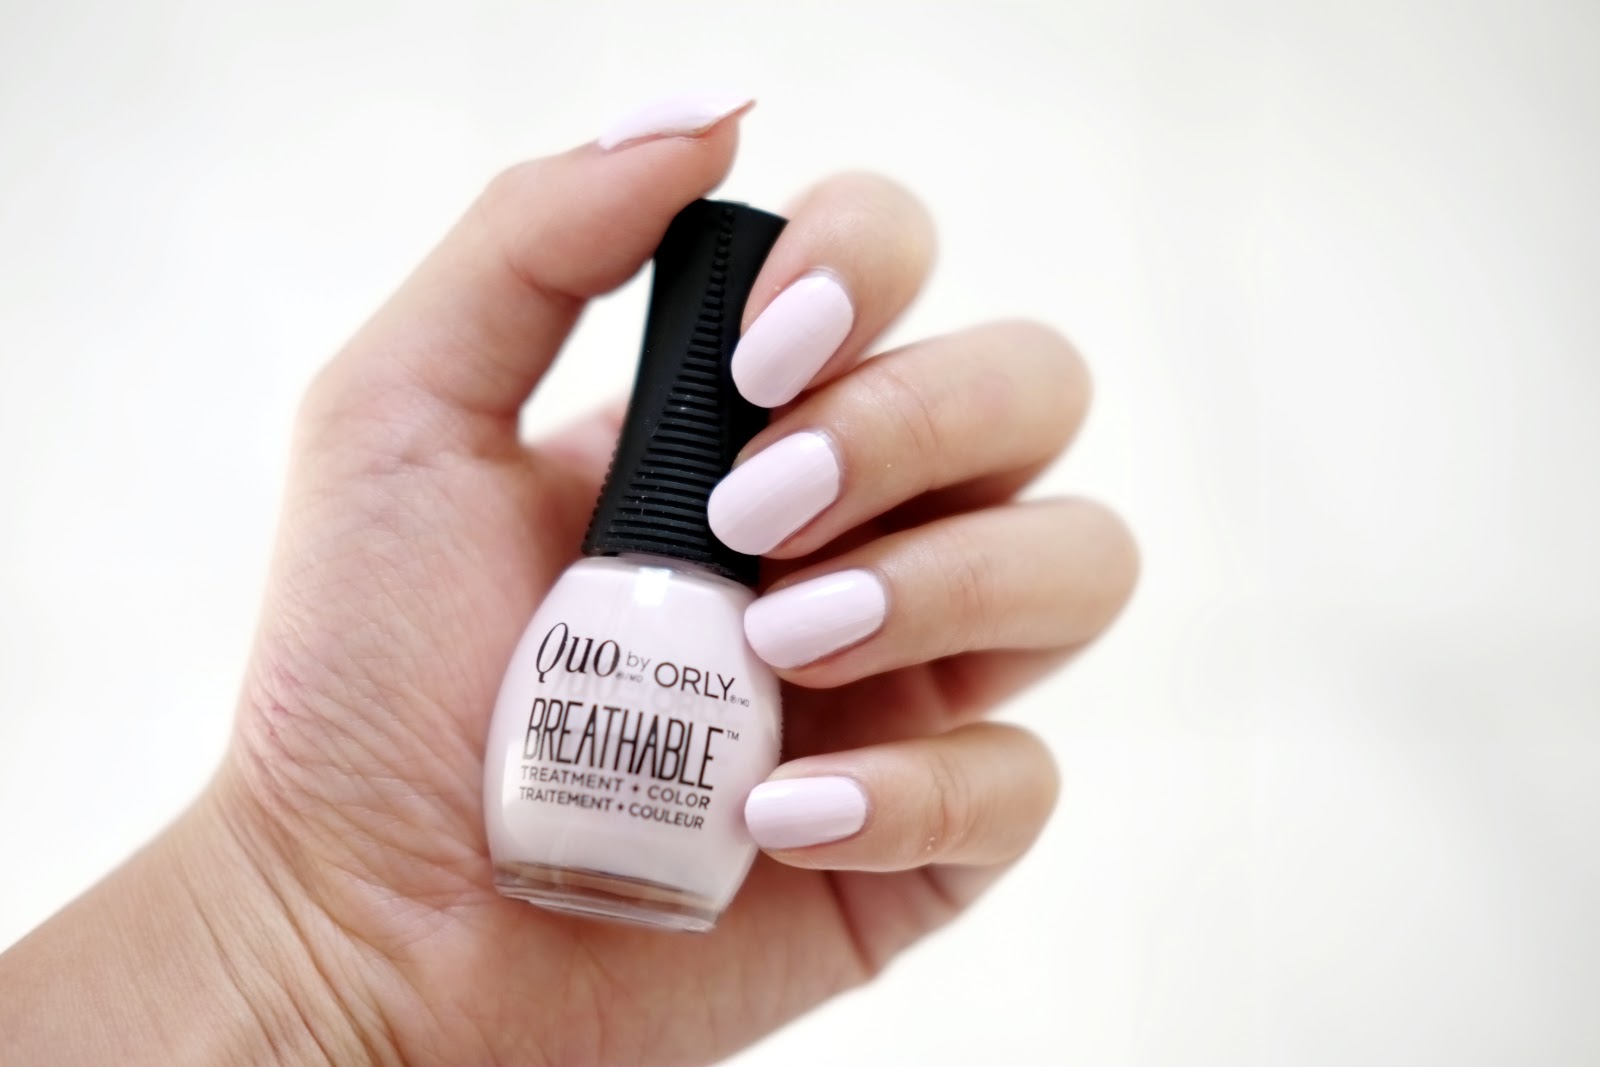 9. Orly Breathable Treatment + Color Nail Polish in "Power Packed" - wide 8